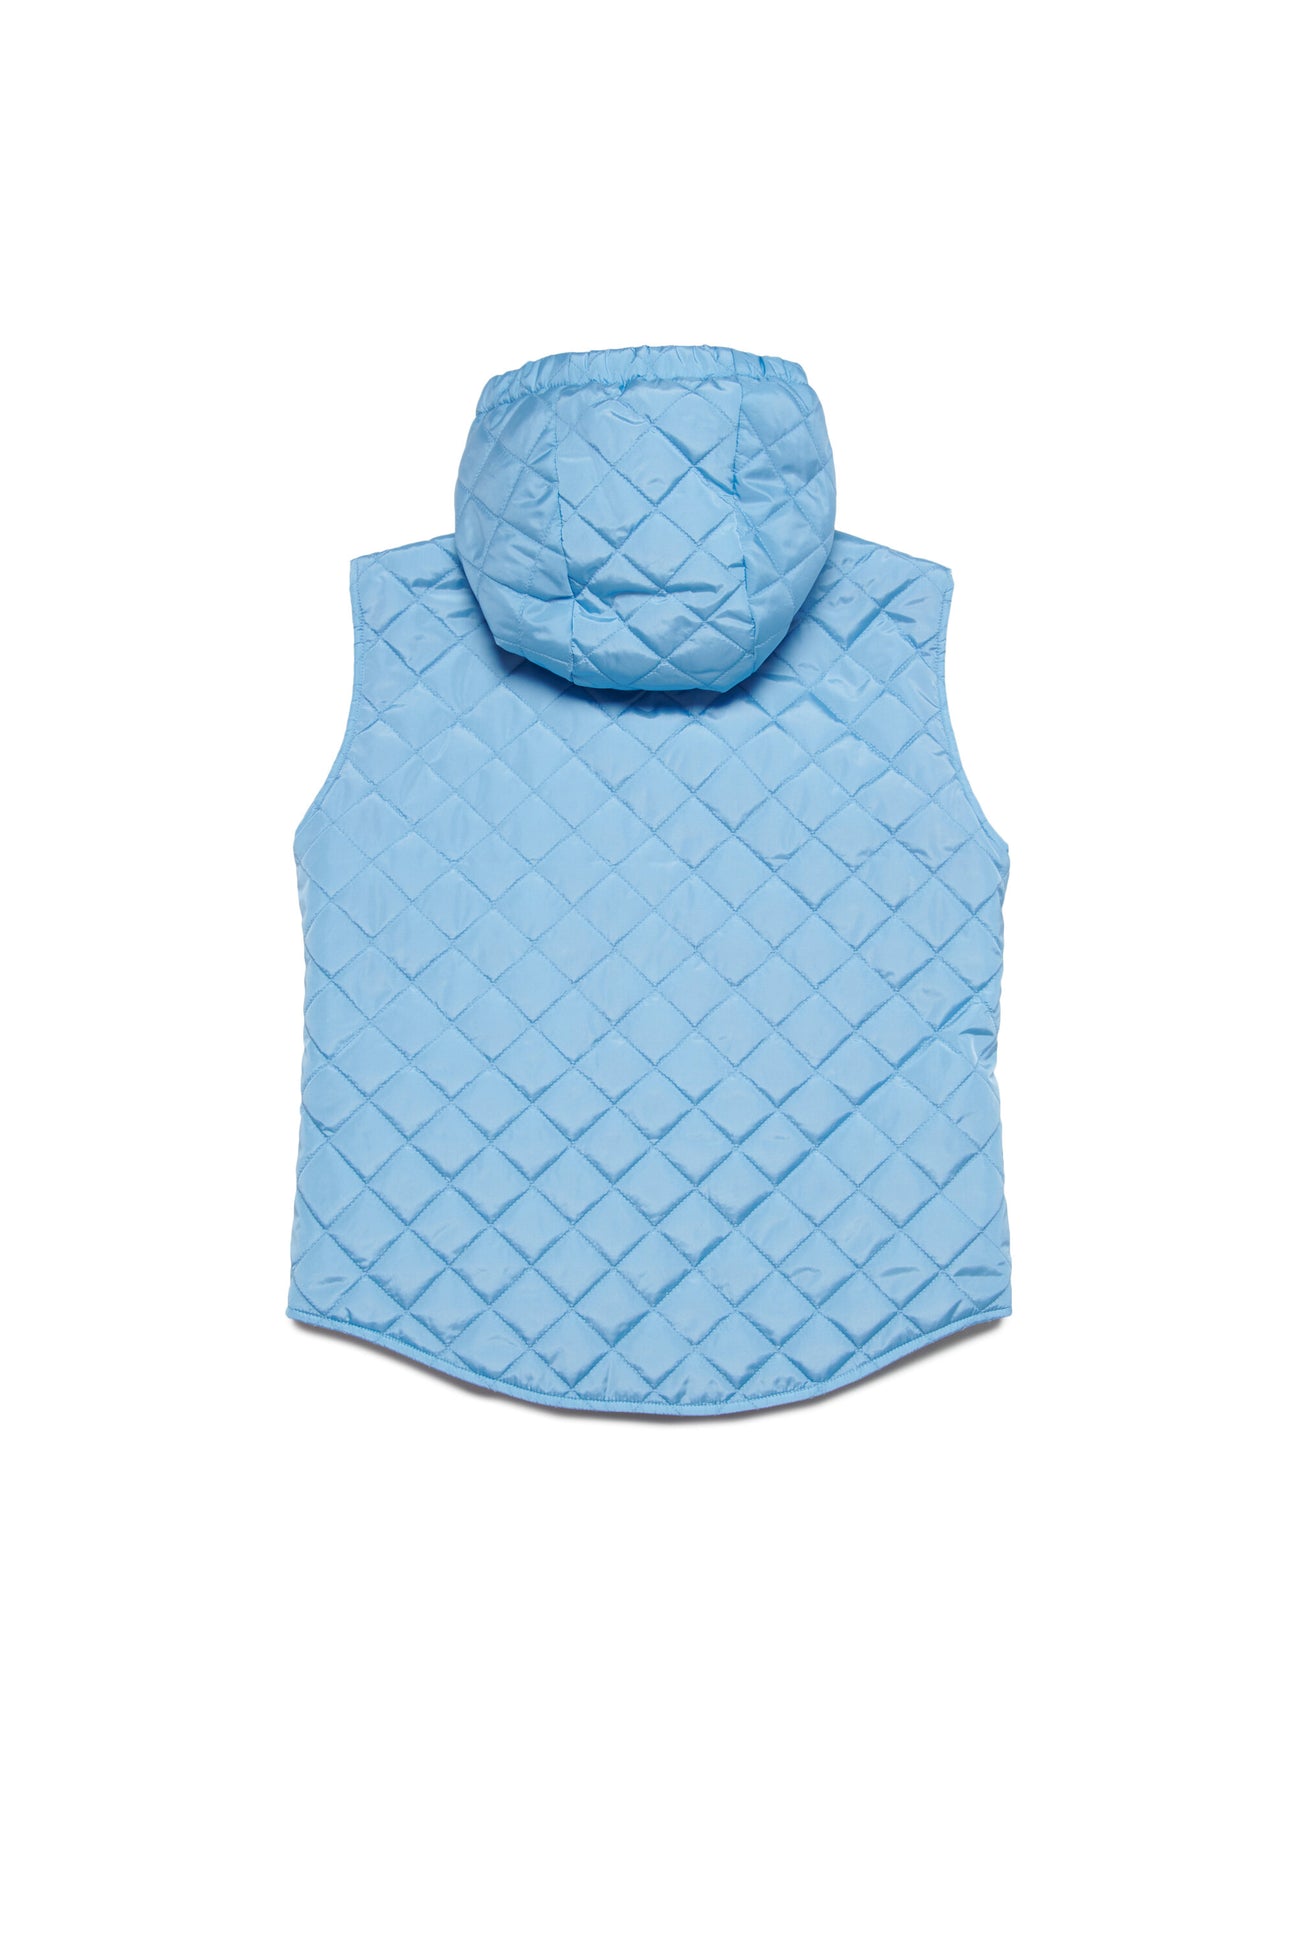 Sleeveless padded jacket branded with surf logo patch Sleeveless padded jacket branded with surf logo patch